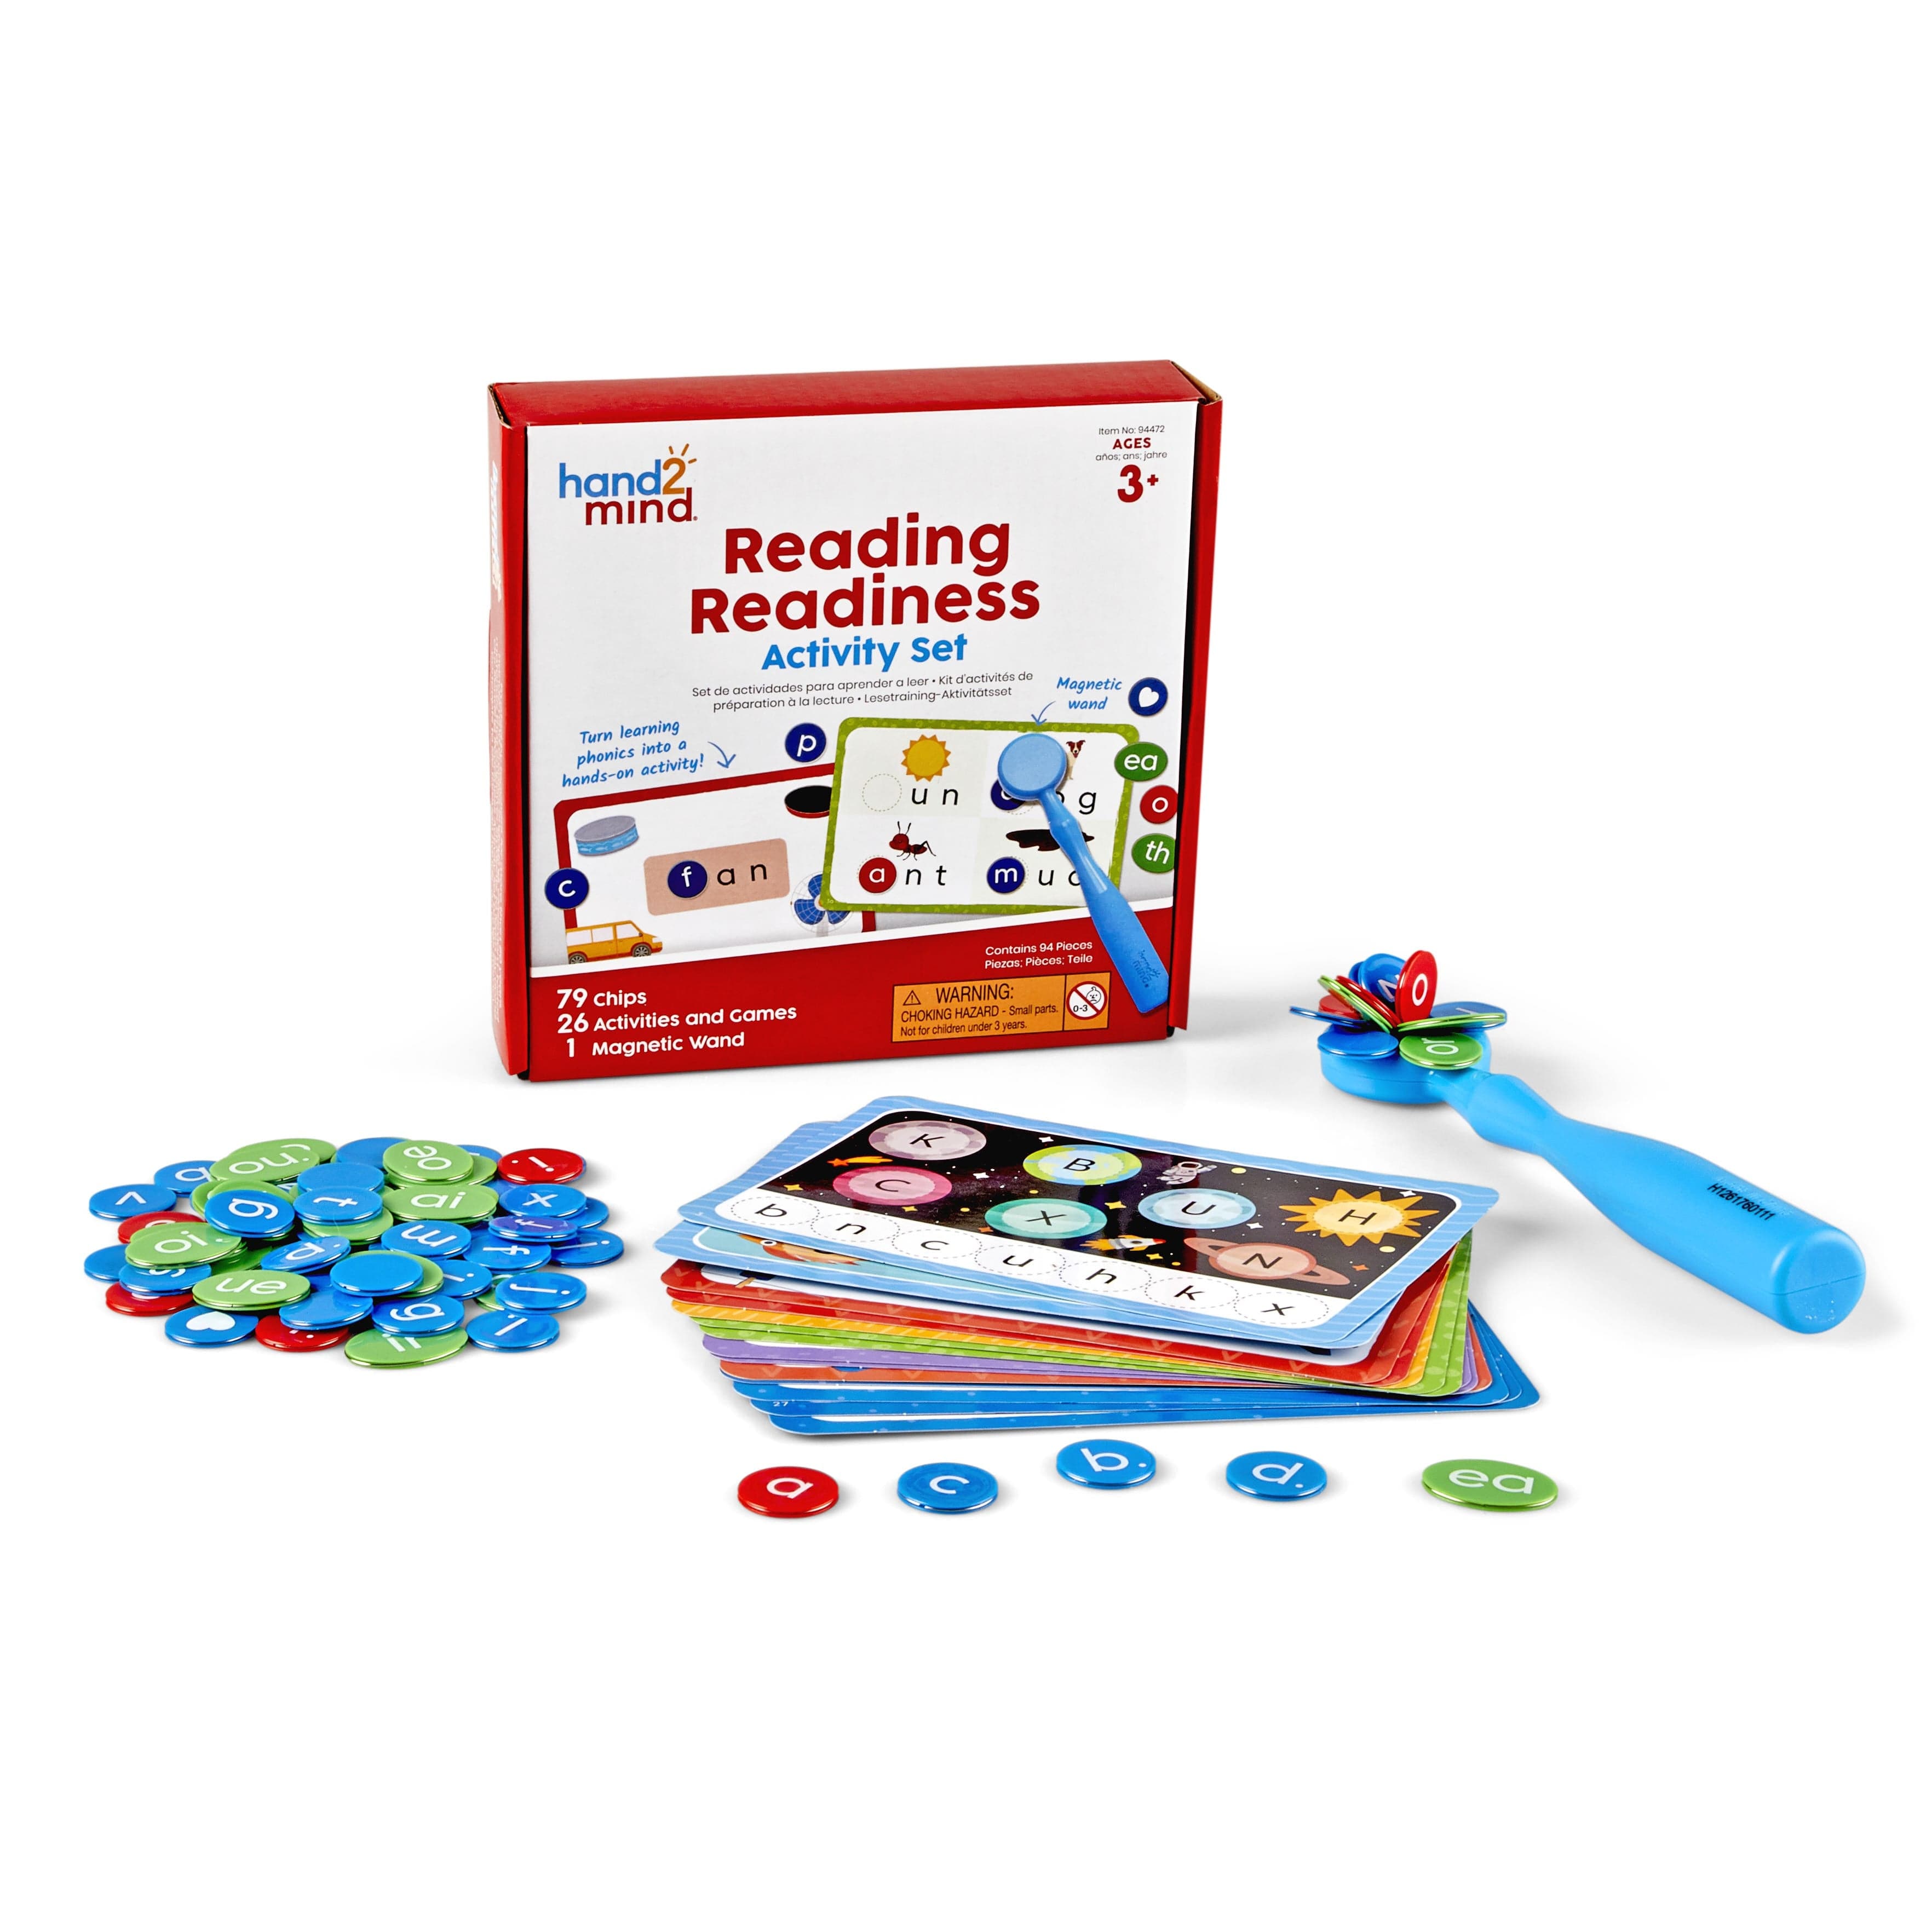 Reading Readiness Activity Set, The Reading Readiness Activity Set is great for hands-on interactive literacy learning in the classroom or at home. Children use the magnetic wand and letter and sound counters to learn upper- and lowercase letters, initial and ending sounds, and blending and segmenting sounds. The Reading Readiness Activity Set helps build confident young readers with this hands-on reading readiness set. Children use the magnetic wand and letter and sound counters to learn upper- and lowerca